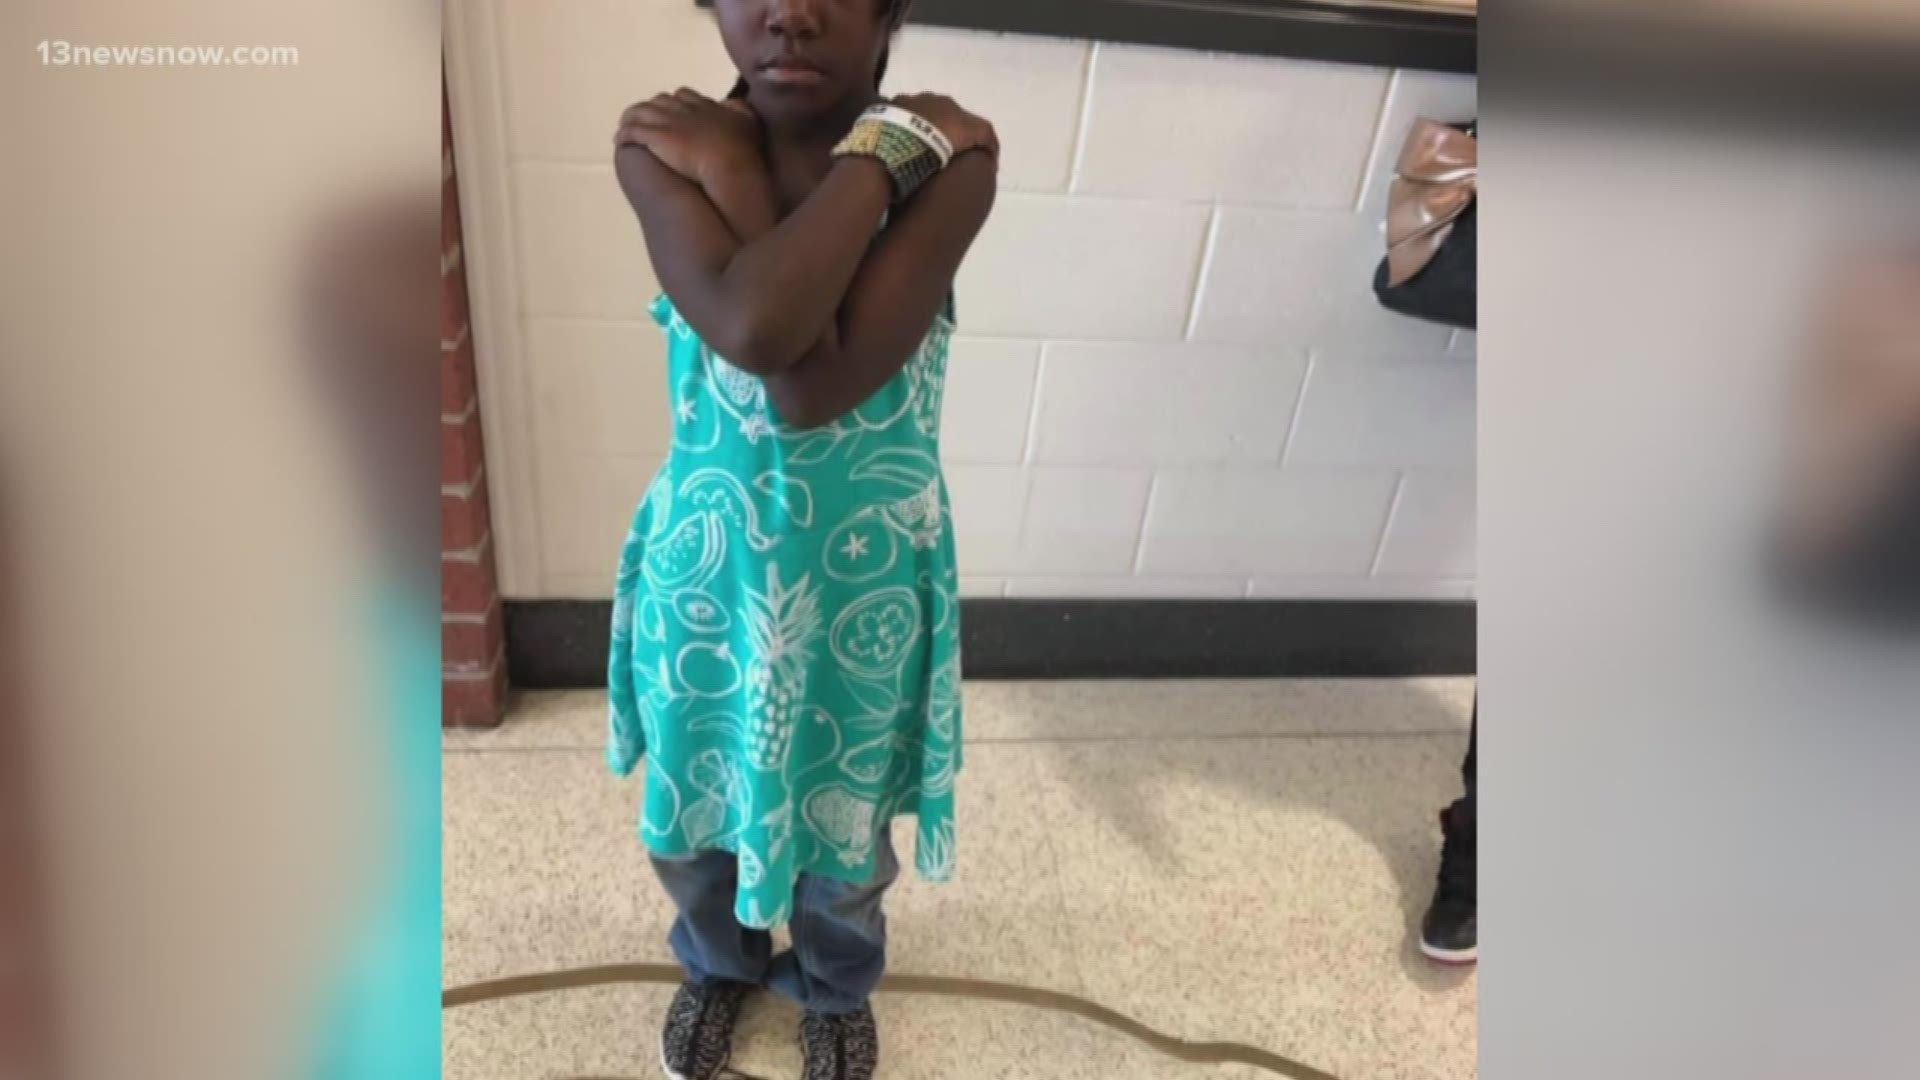 The teacher at Crossroads Elementary said she made the decision to switch the students' clothes because one of the girl's clothes were dirty.